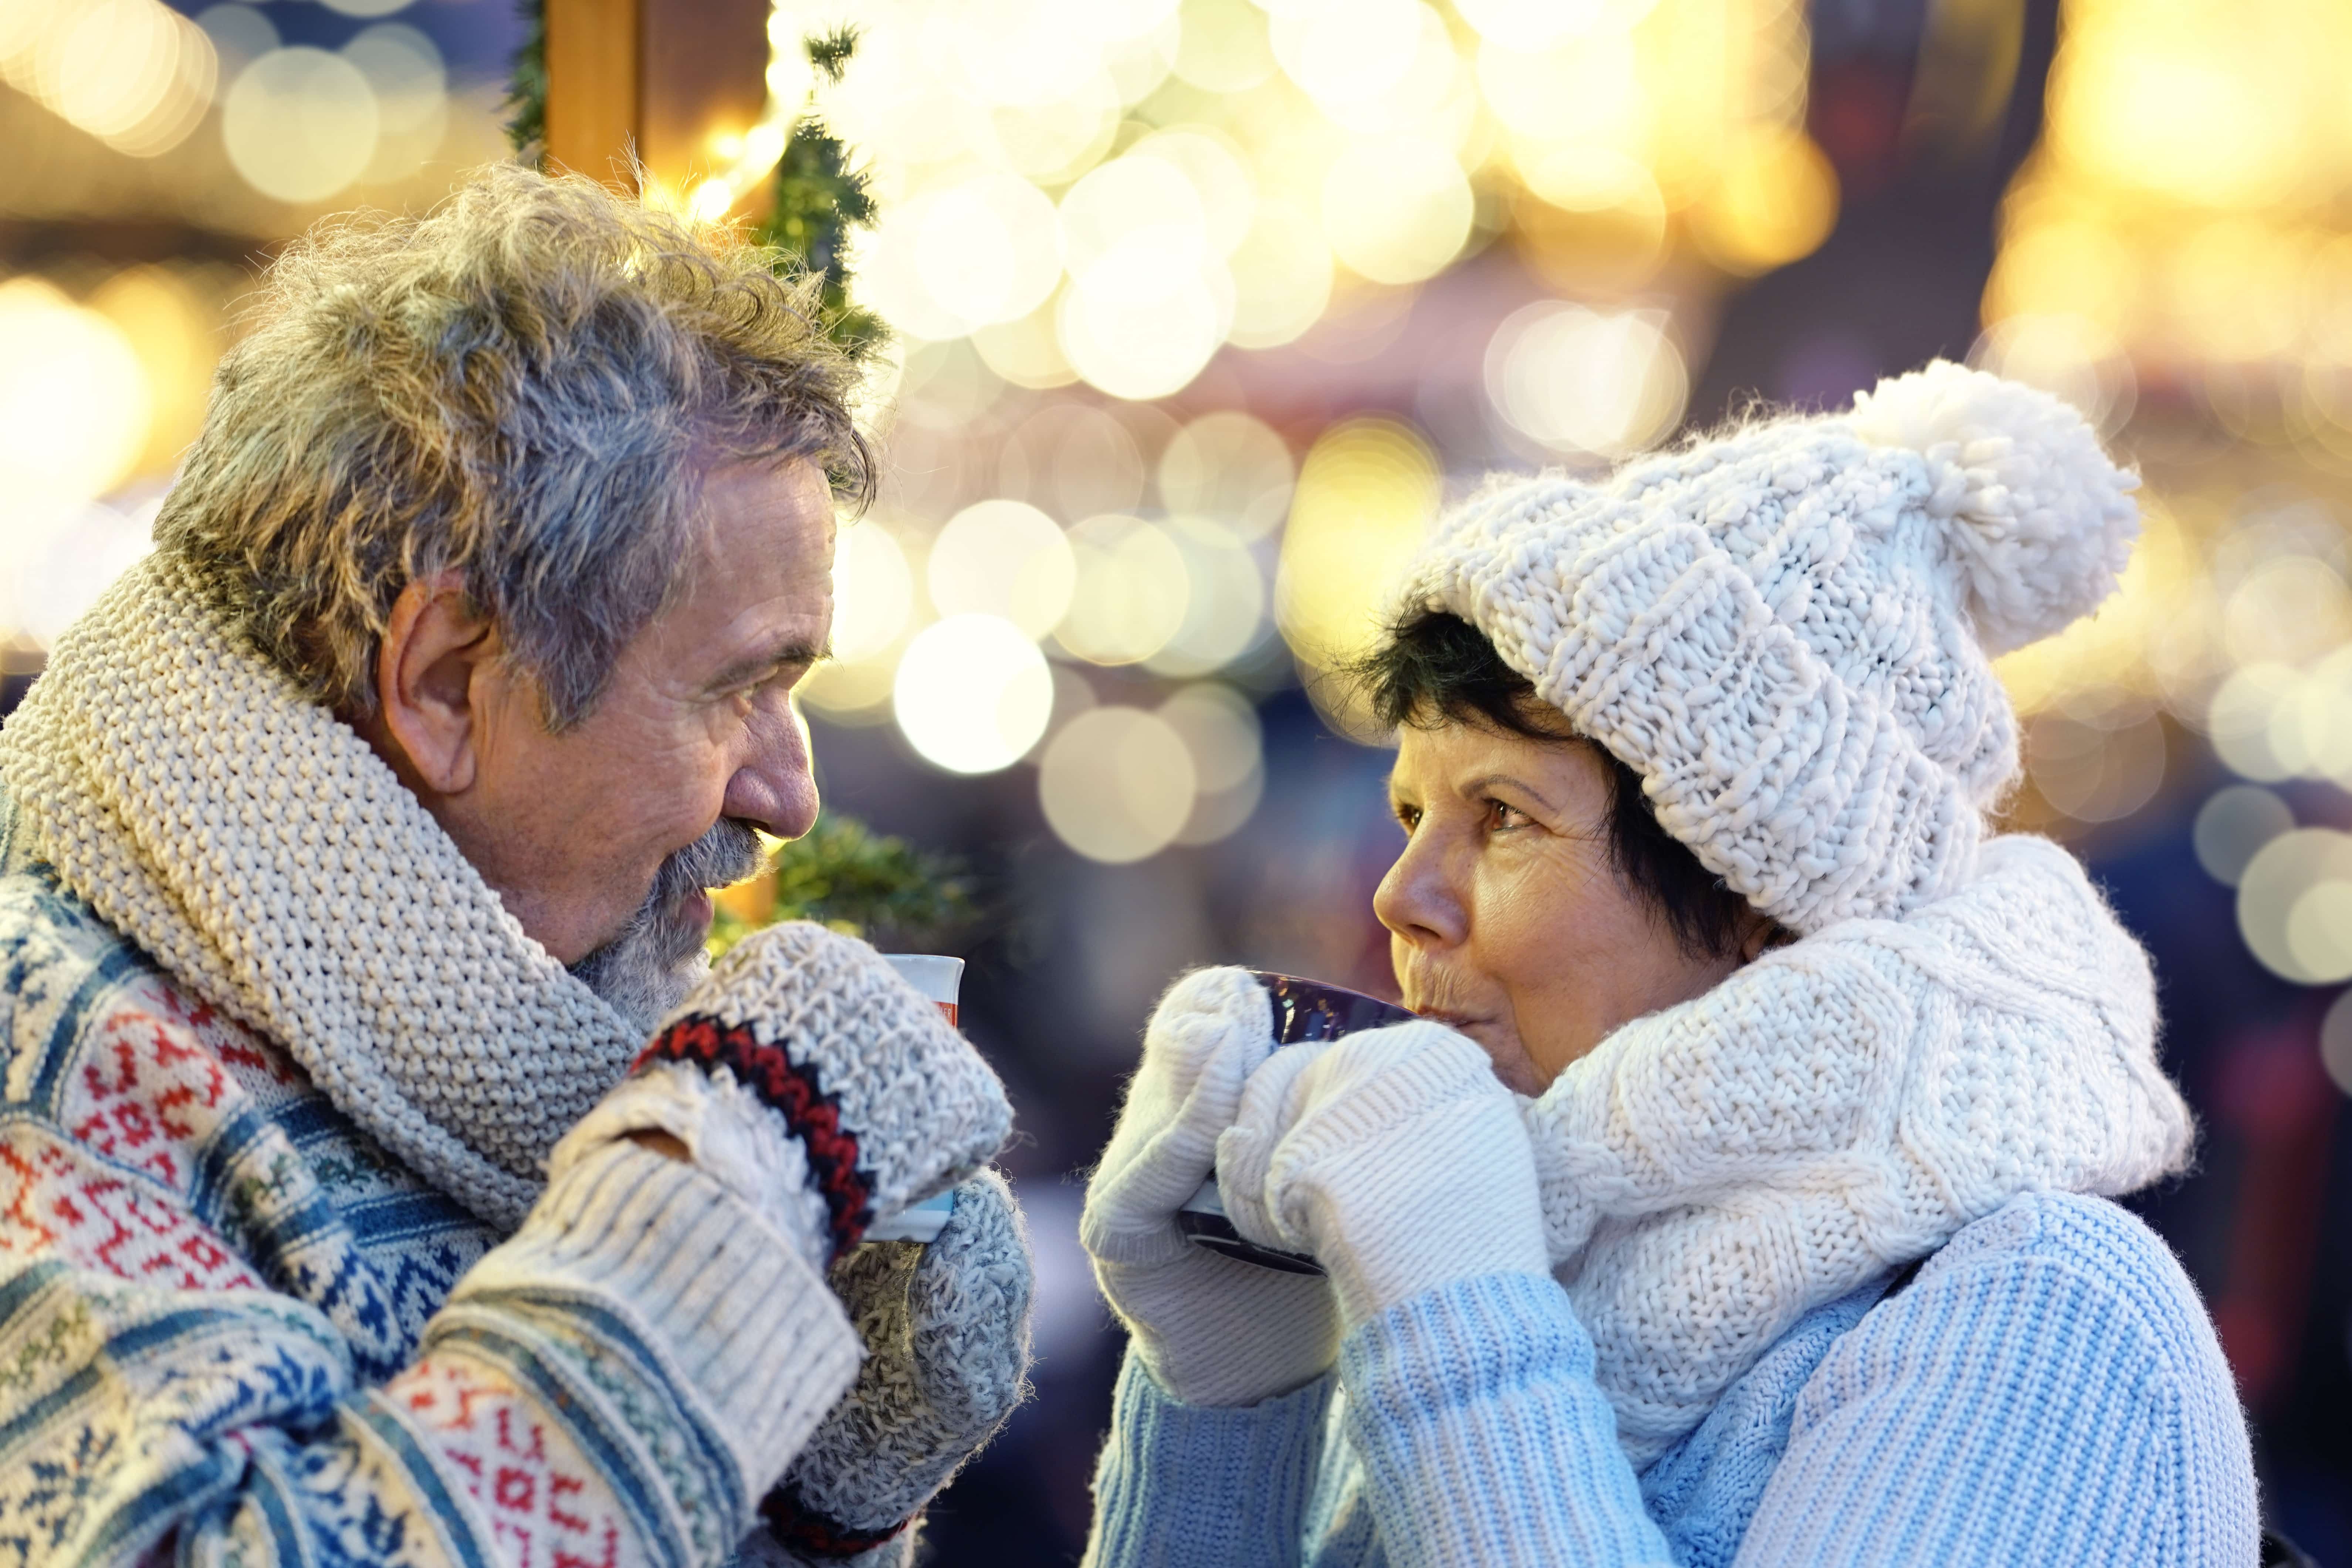 A senior man and woman wearing sweaters, gloves, hats, and scarves and drinking hot drinks to stay warm.